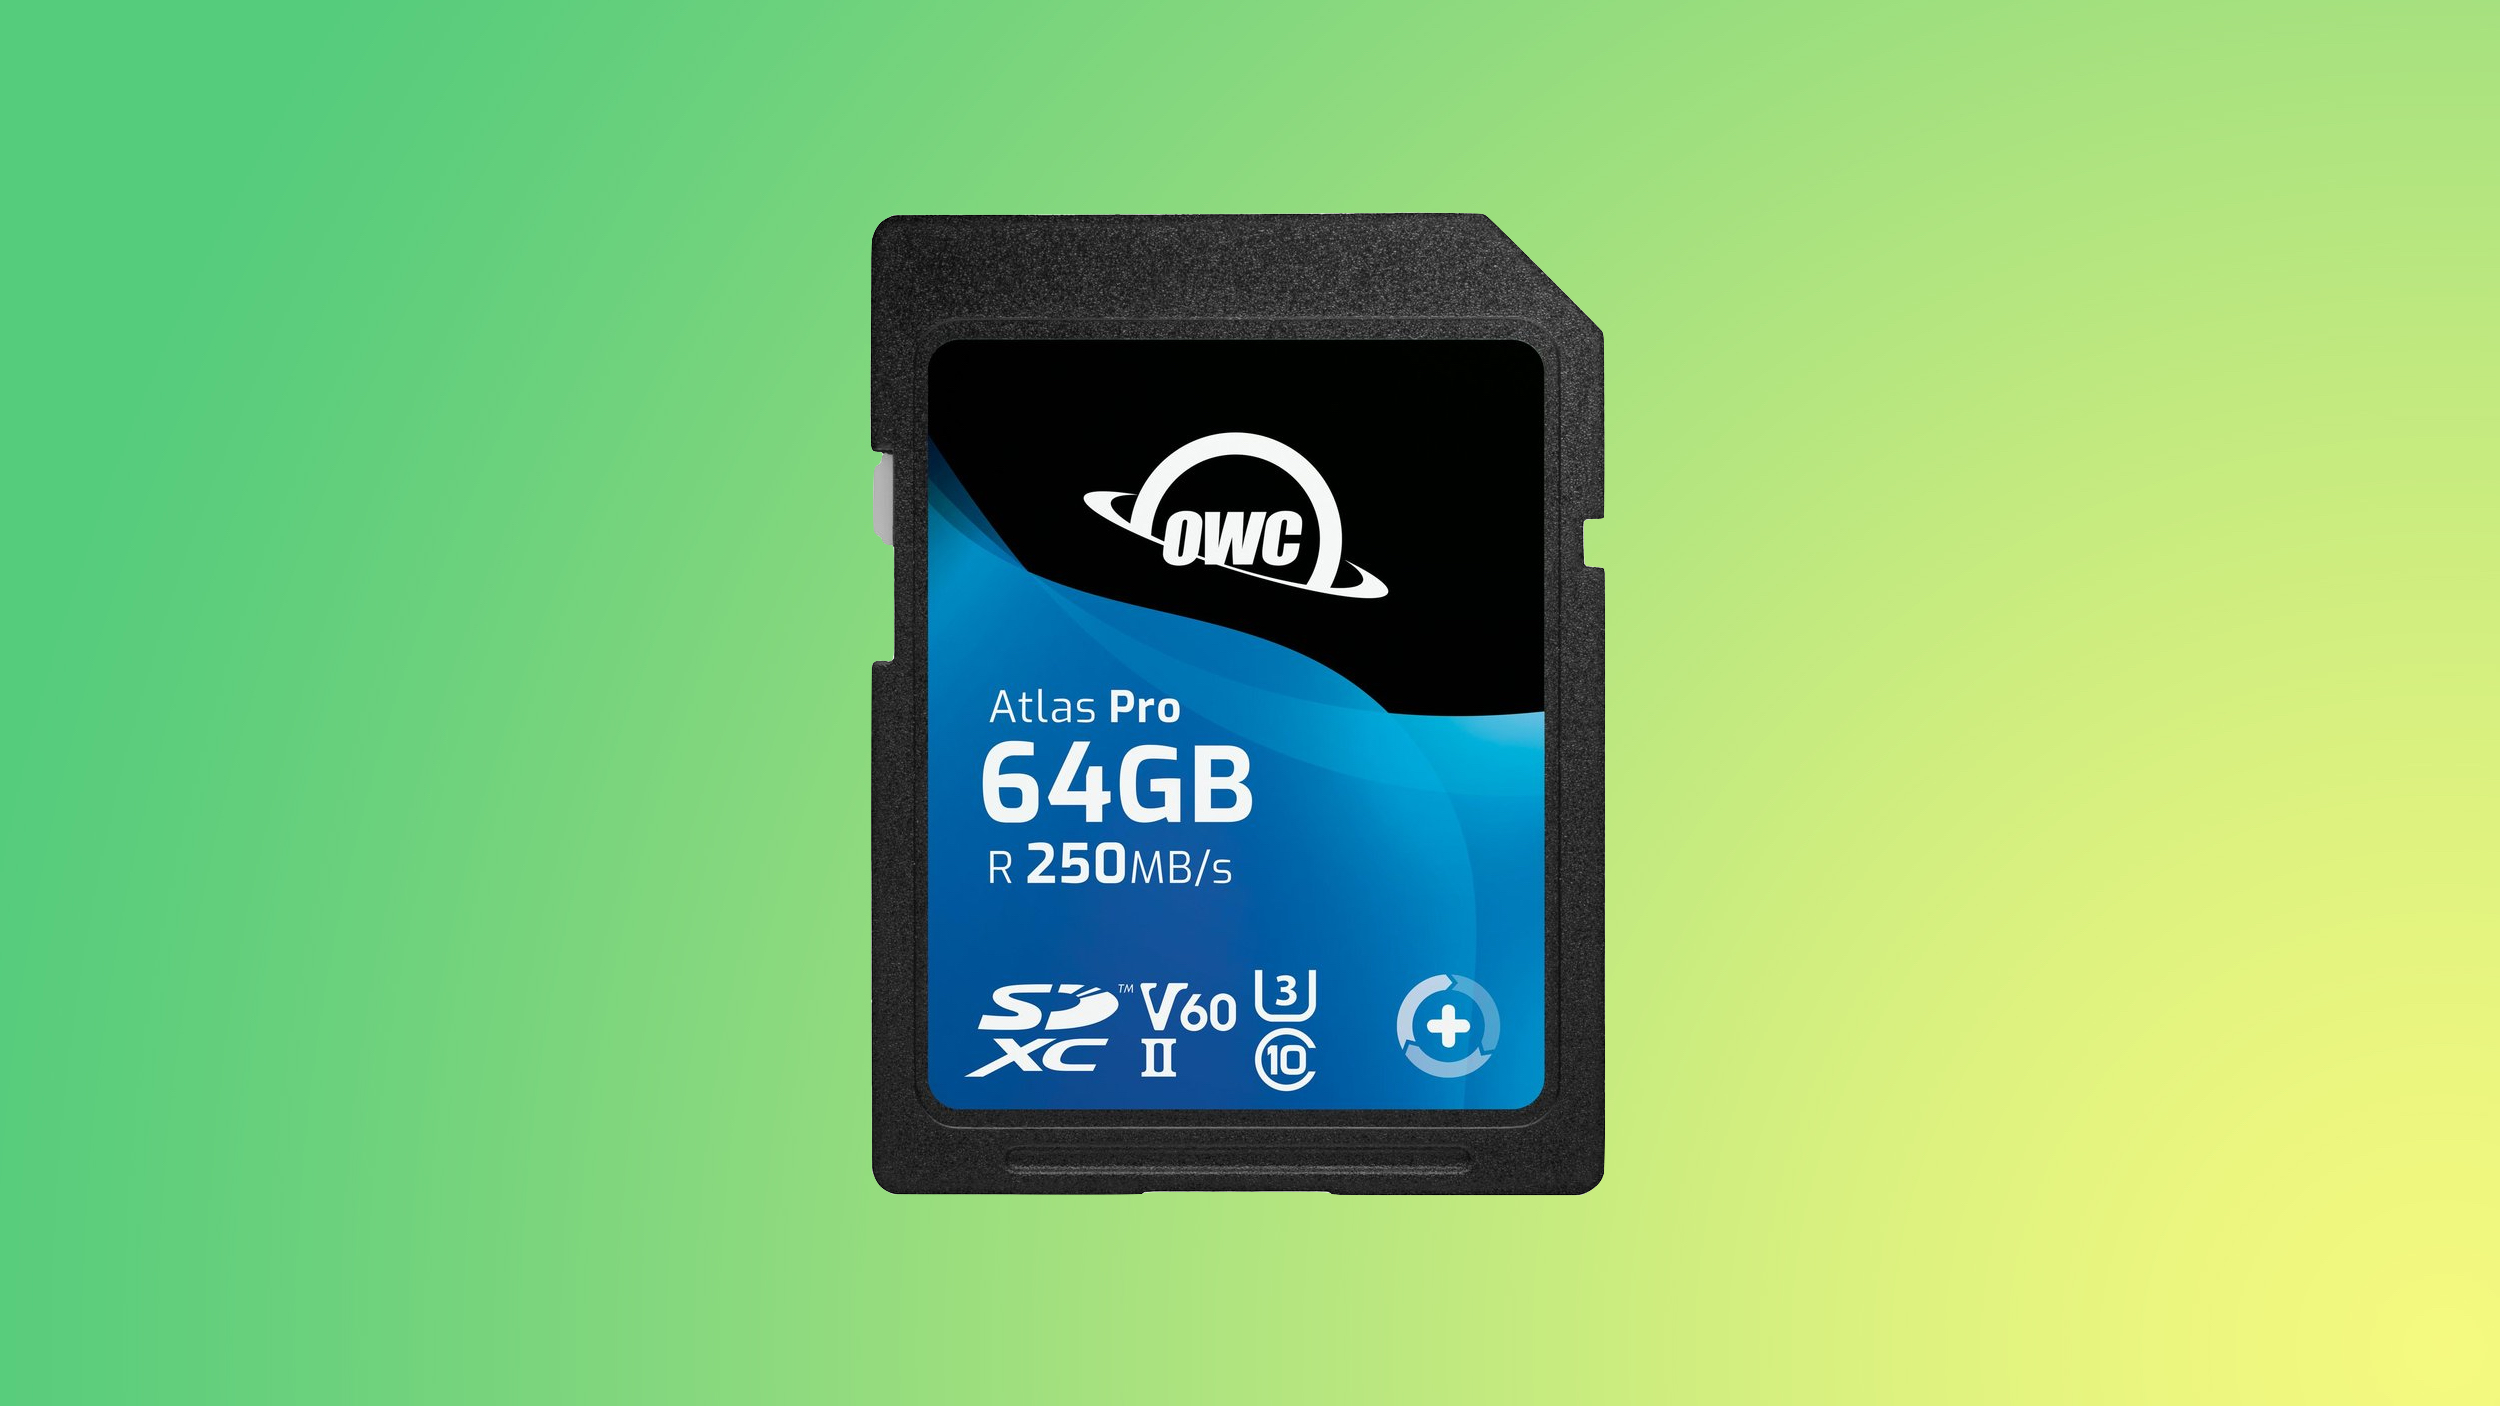 Deals: OWC's New Sale Has Major Savings on Atlas Memory Cards With Our Exclusive Code